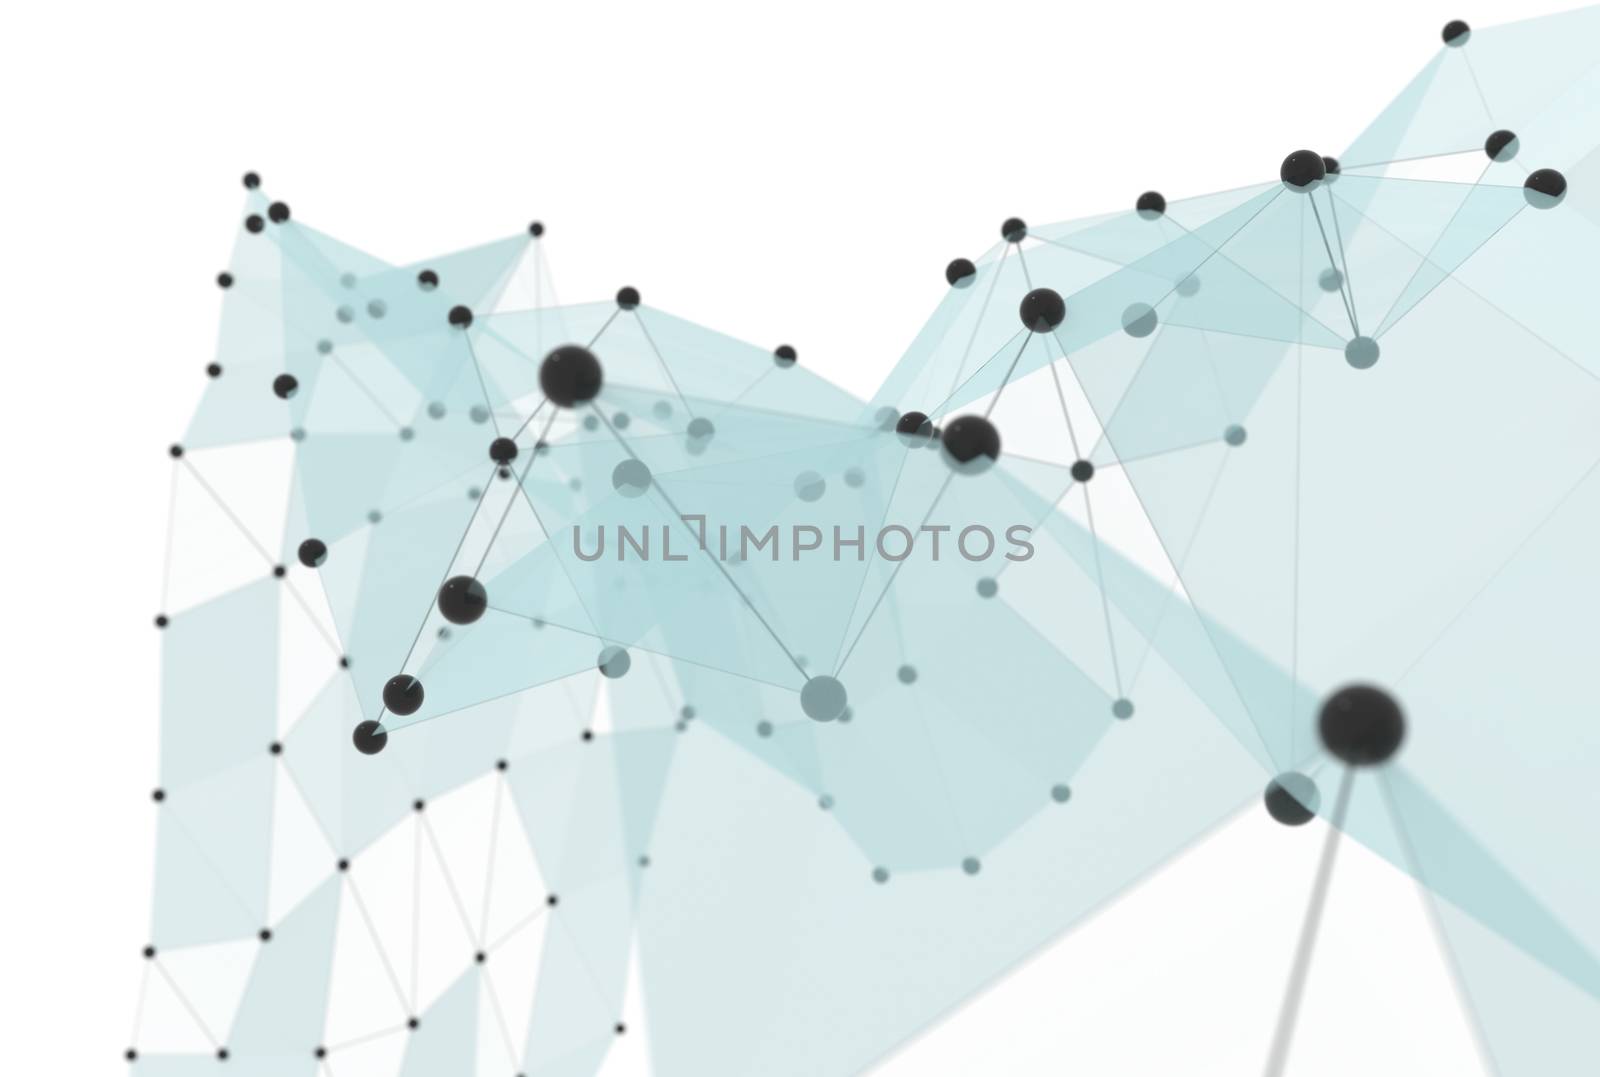 Creative social network. The black points are connected by lines and blue transparent triangles. 3d illustration